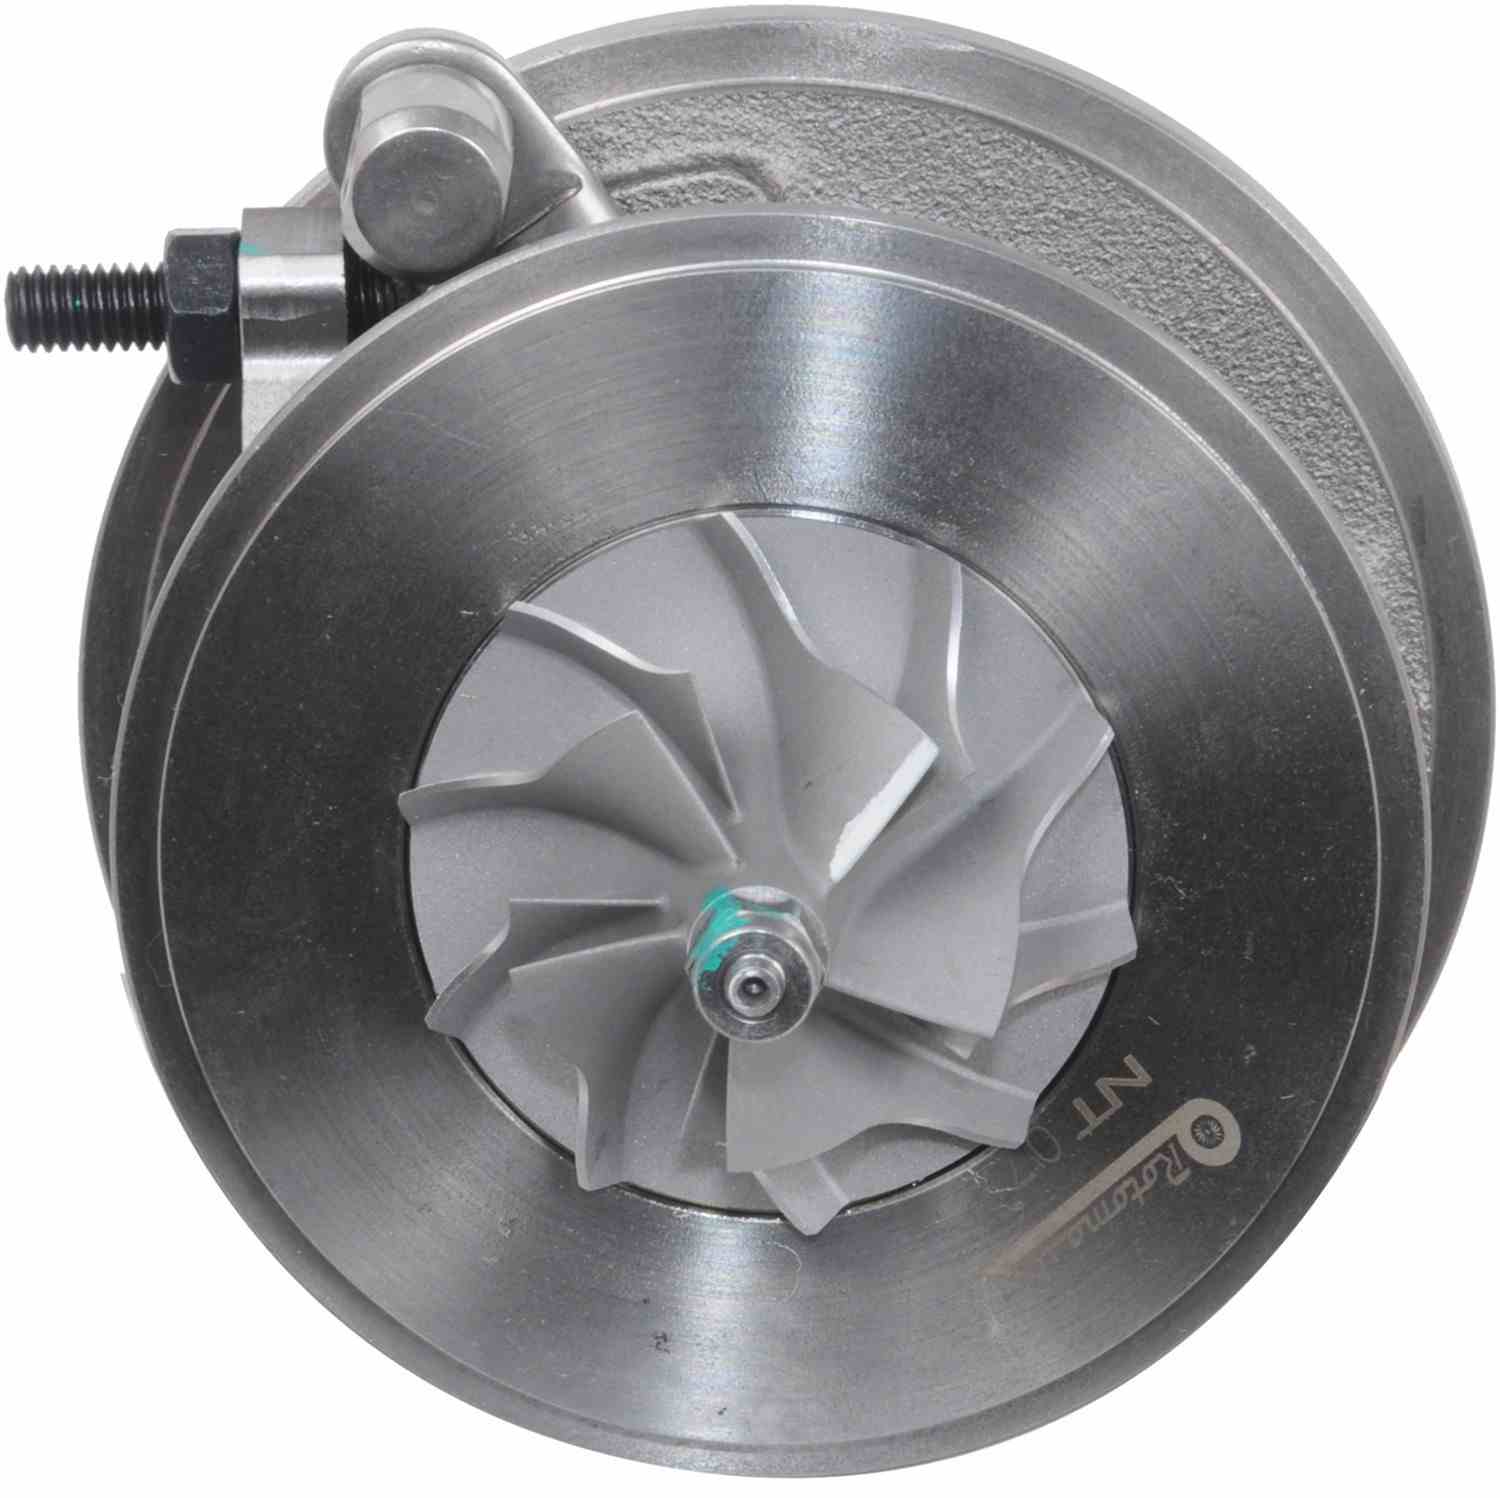 Rotomaster New Turbocharger Cartridge  top view frsport K1390227N